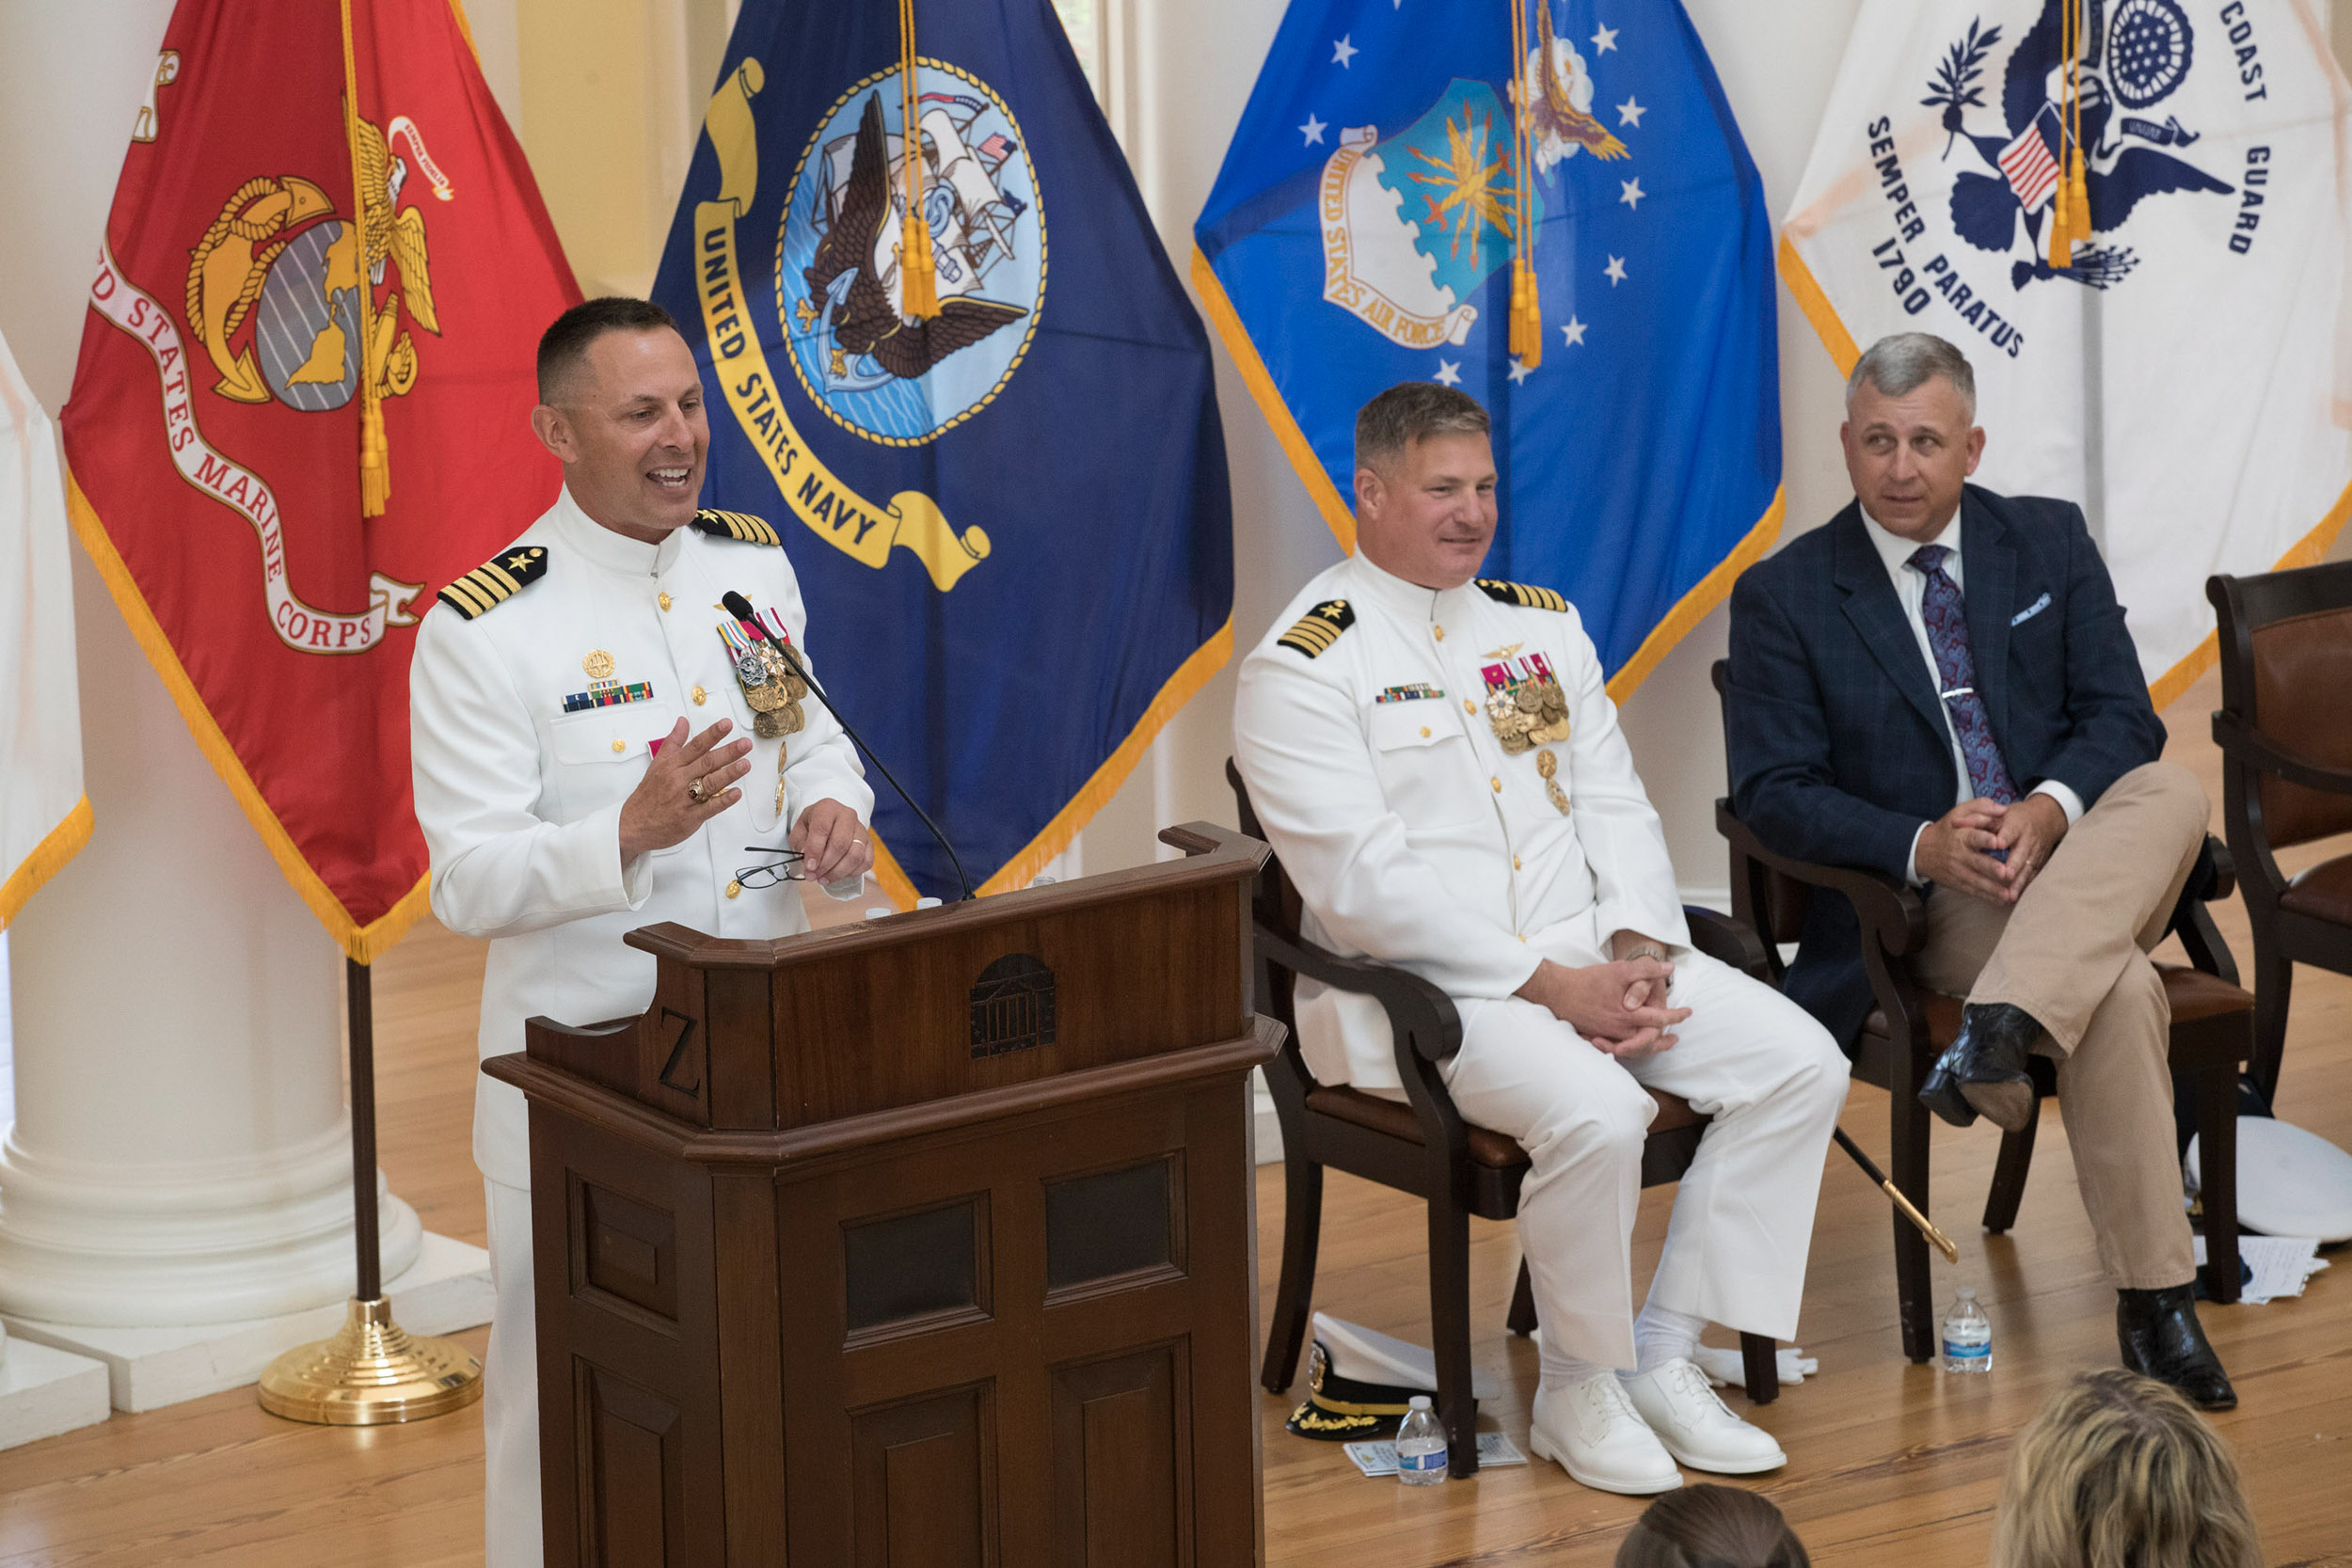 Misner, left, recounts some of his days in the U.S. Navy at his retirement ceremony in the Rotunda Dome Room.